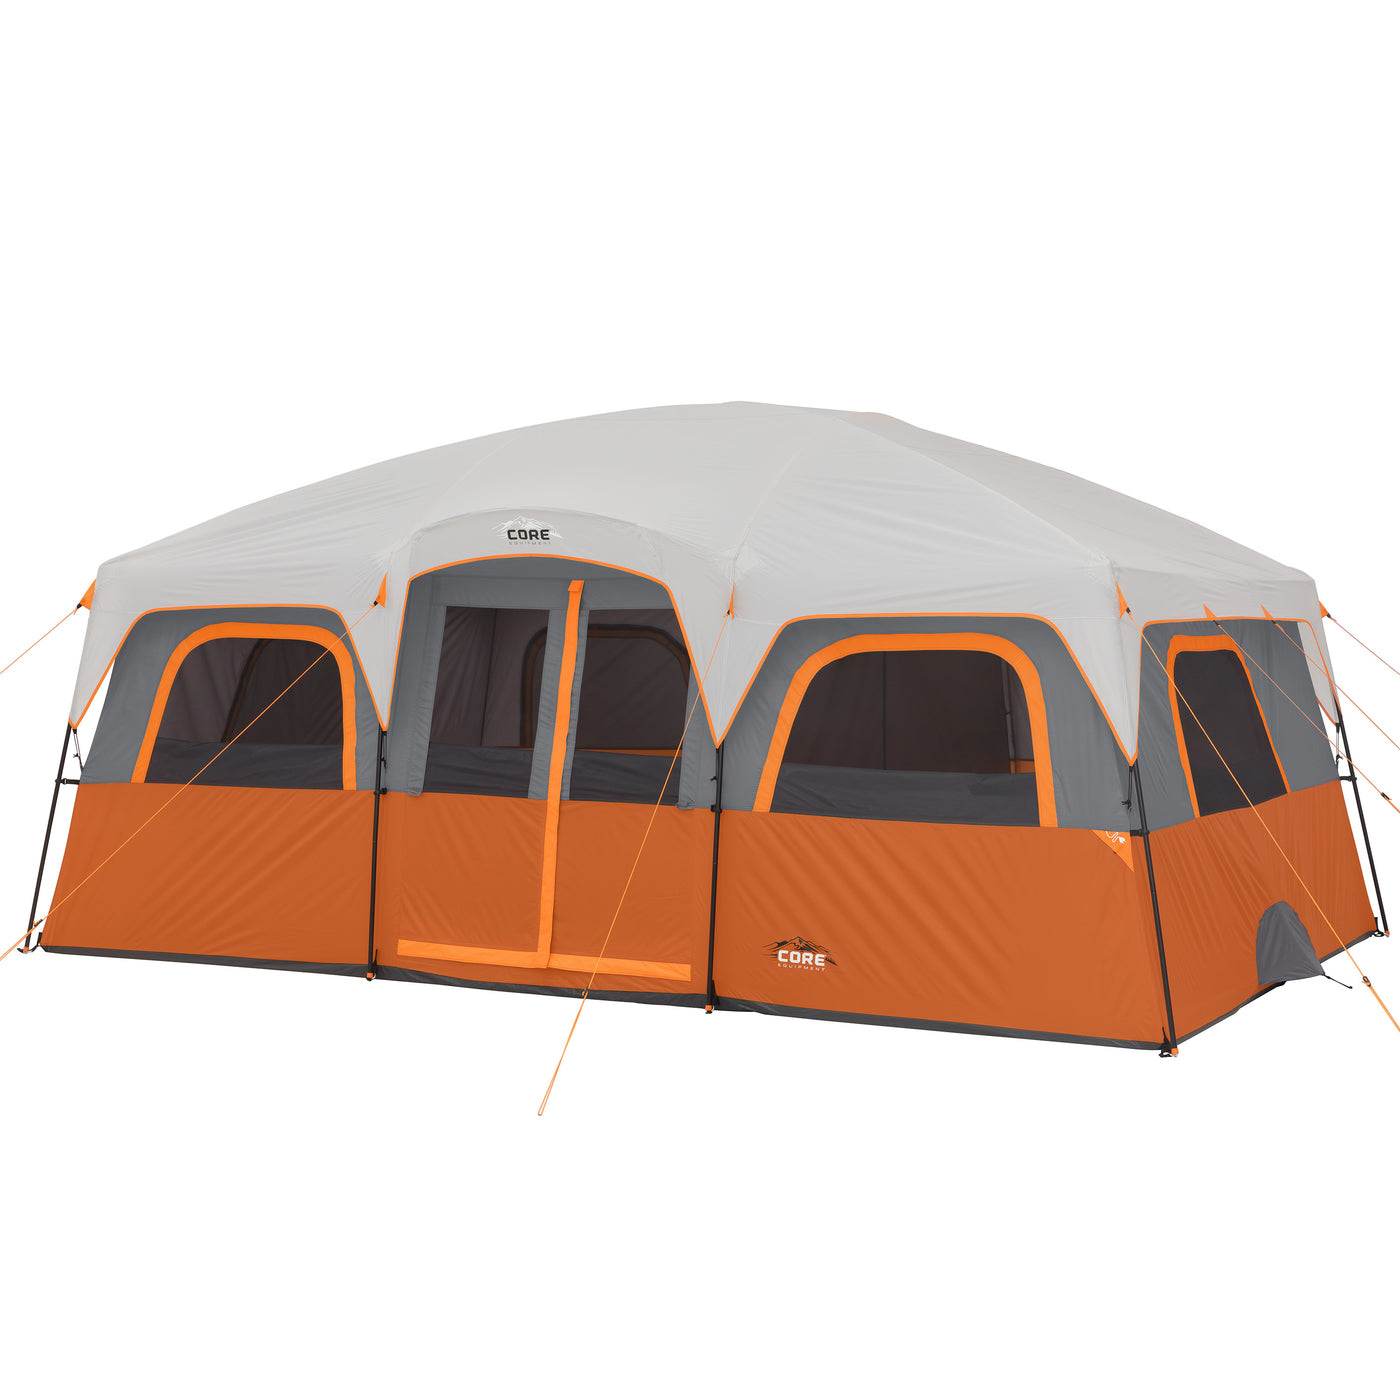 12 Person Extra Large Straight Wall Tent with rainfly on